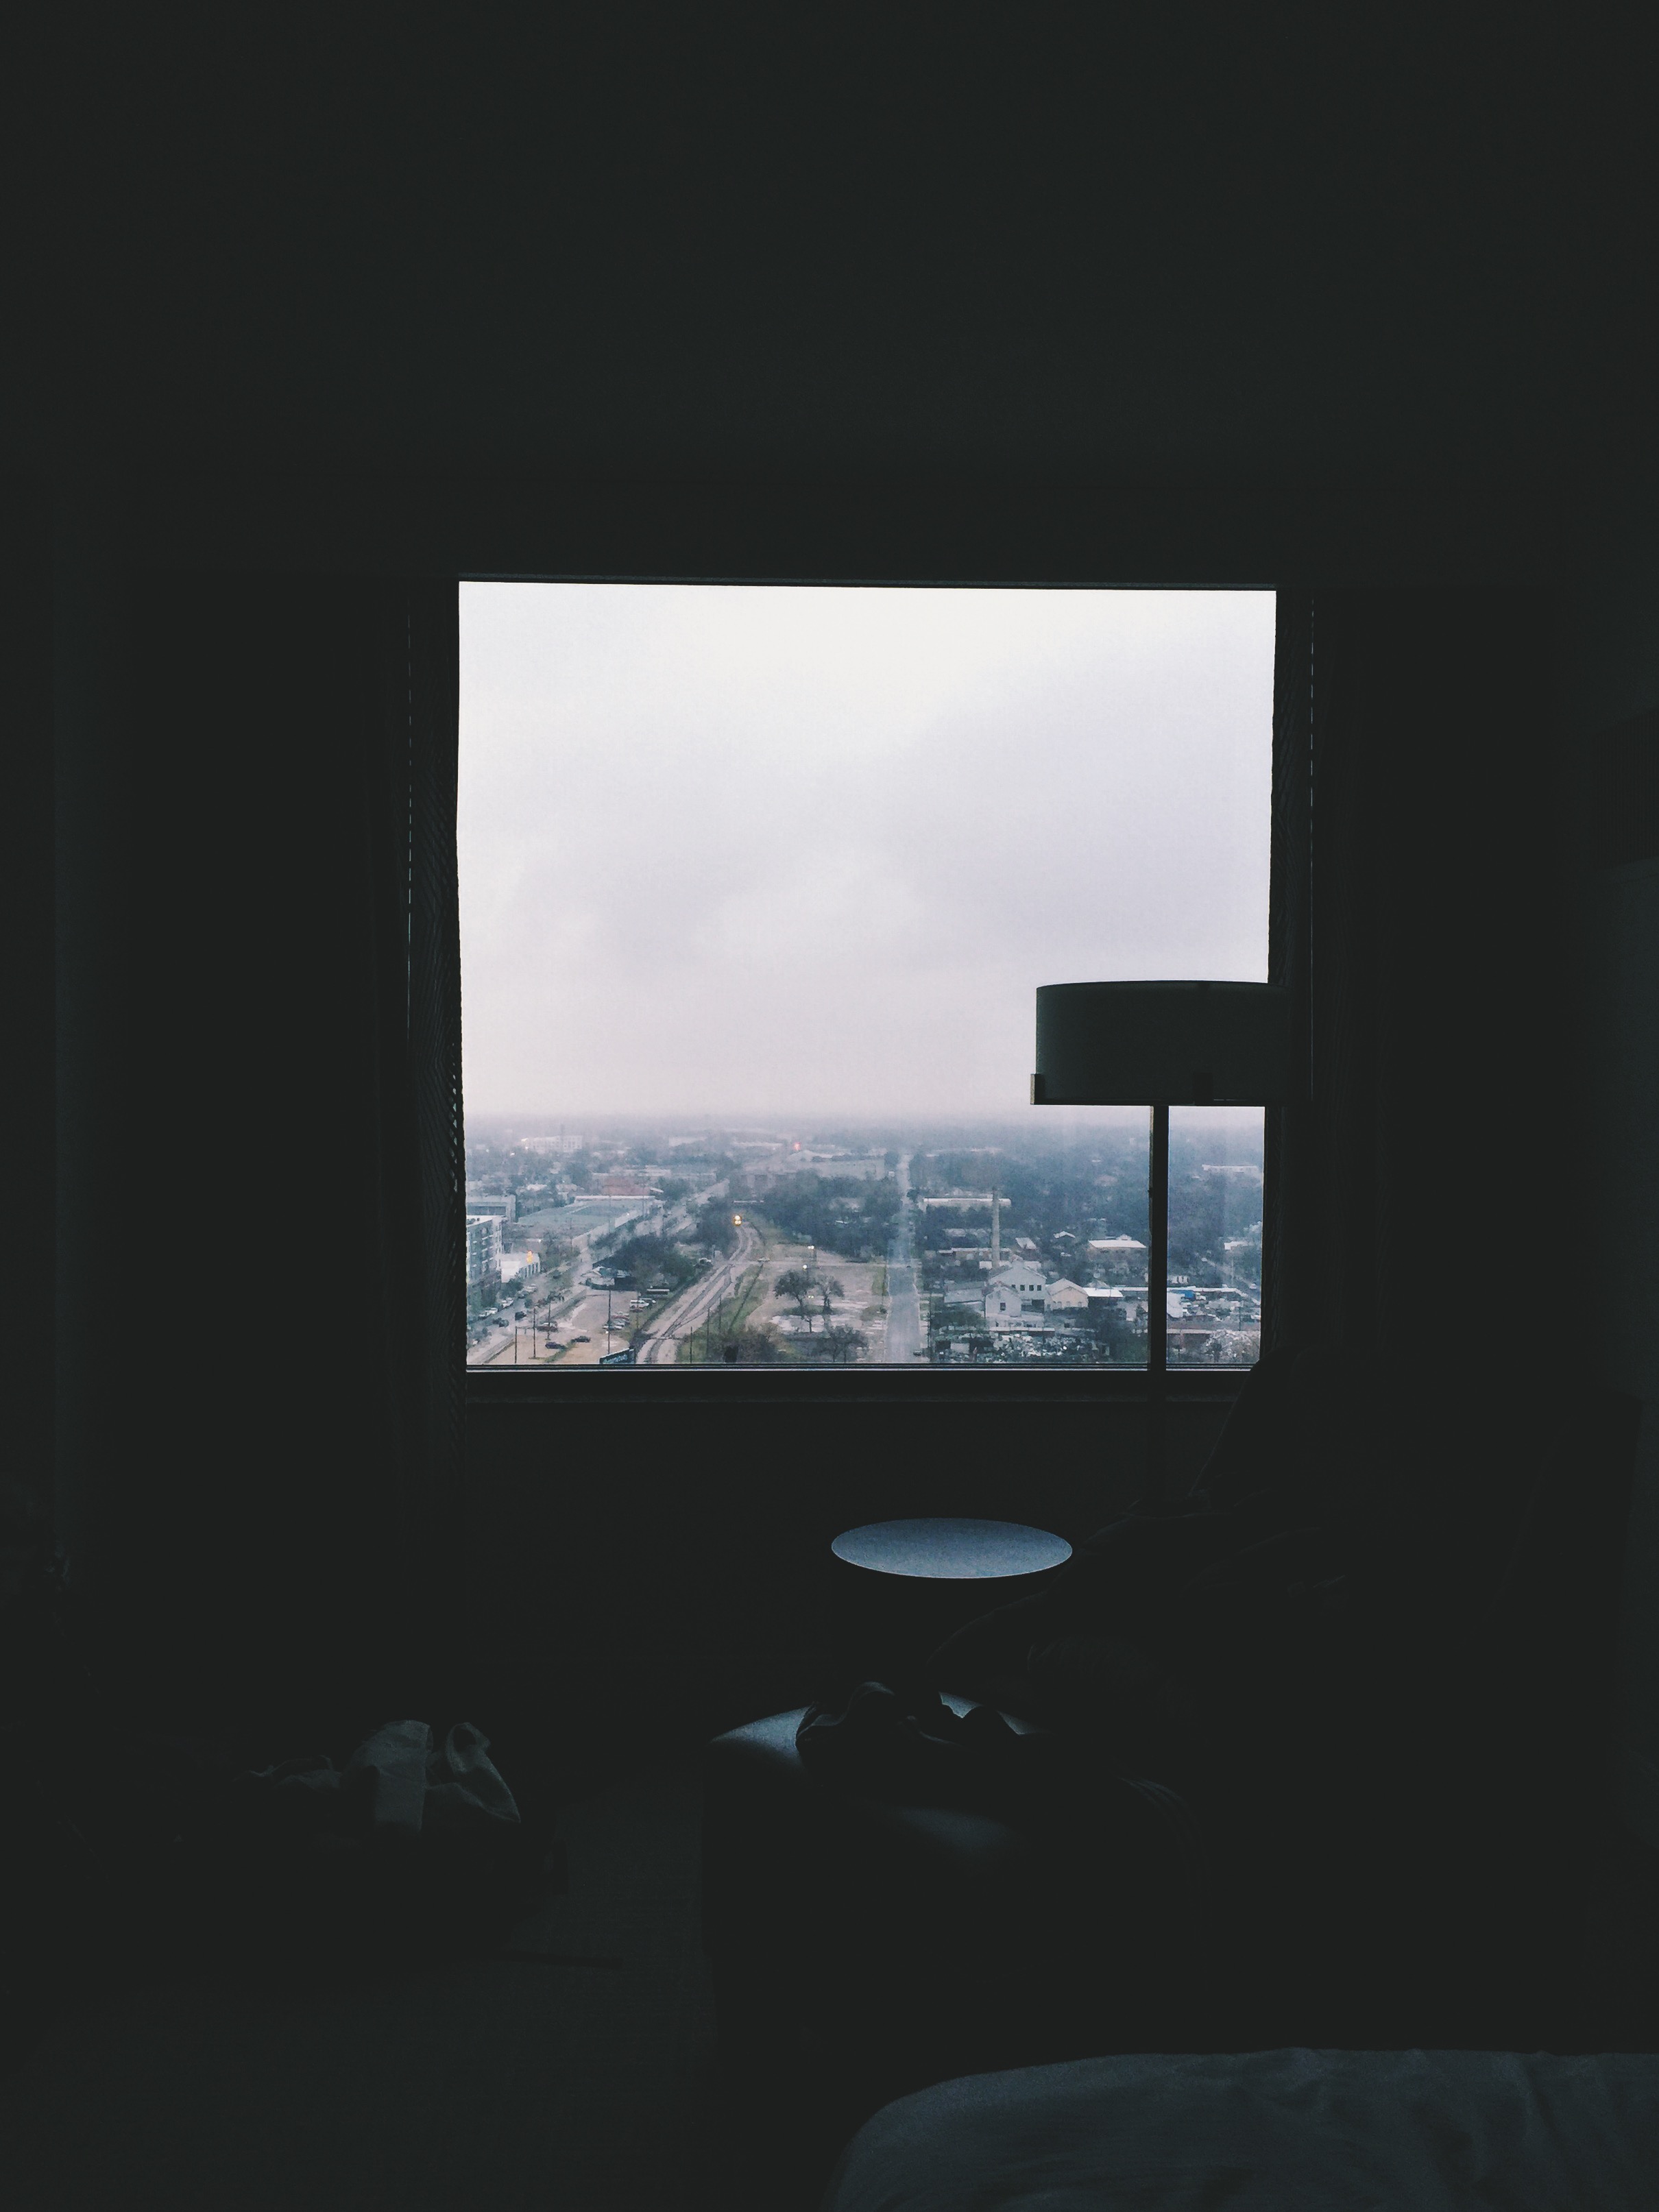   {inside looking out from our hotel room. wasn't much of a view, but the fog was nice this day.}  